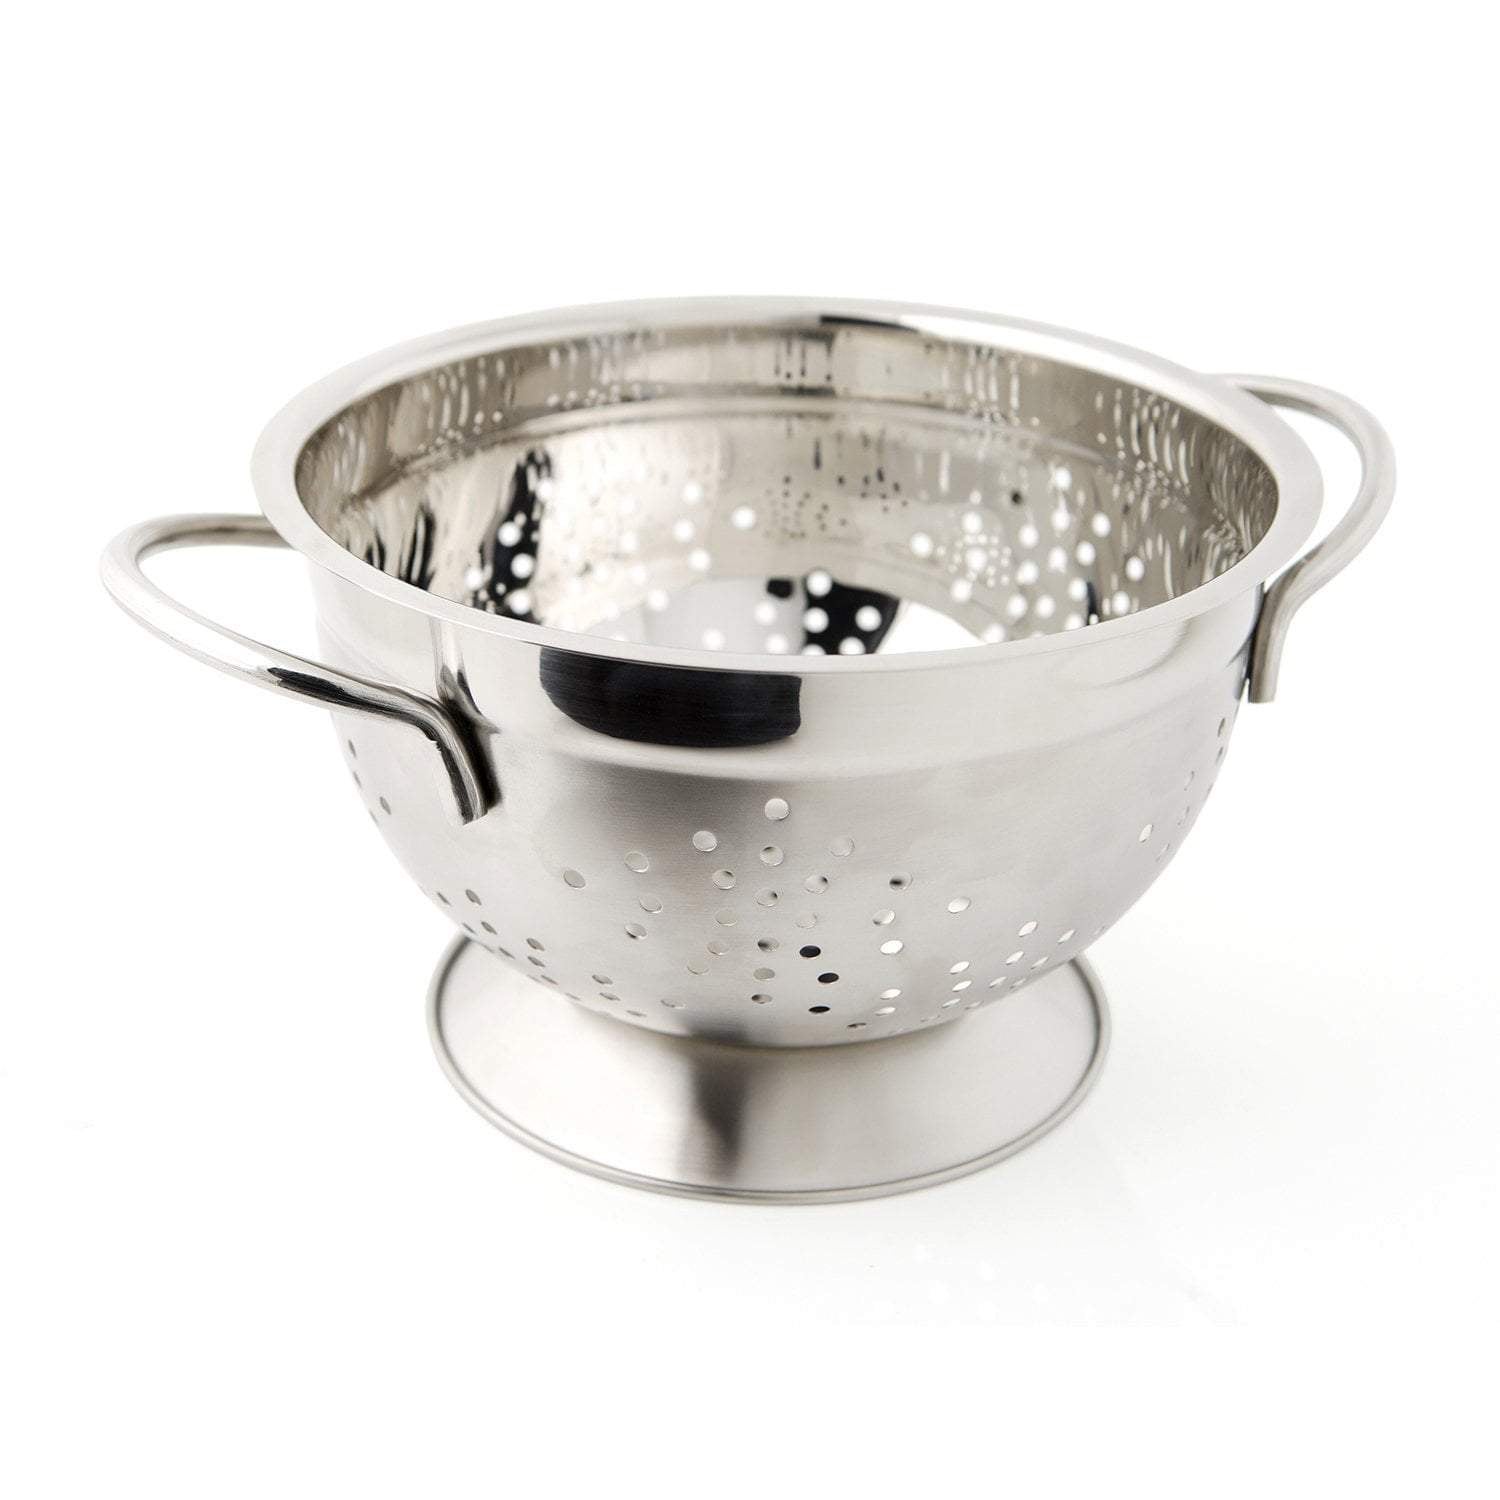 Cuisena Colander 24cm Stainless Steel With Wire Handle